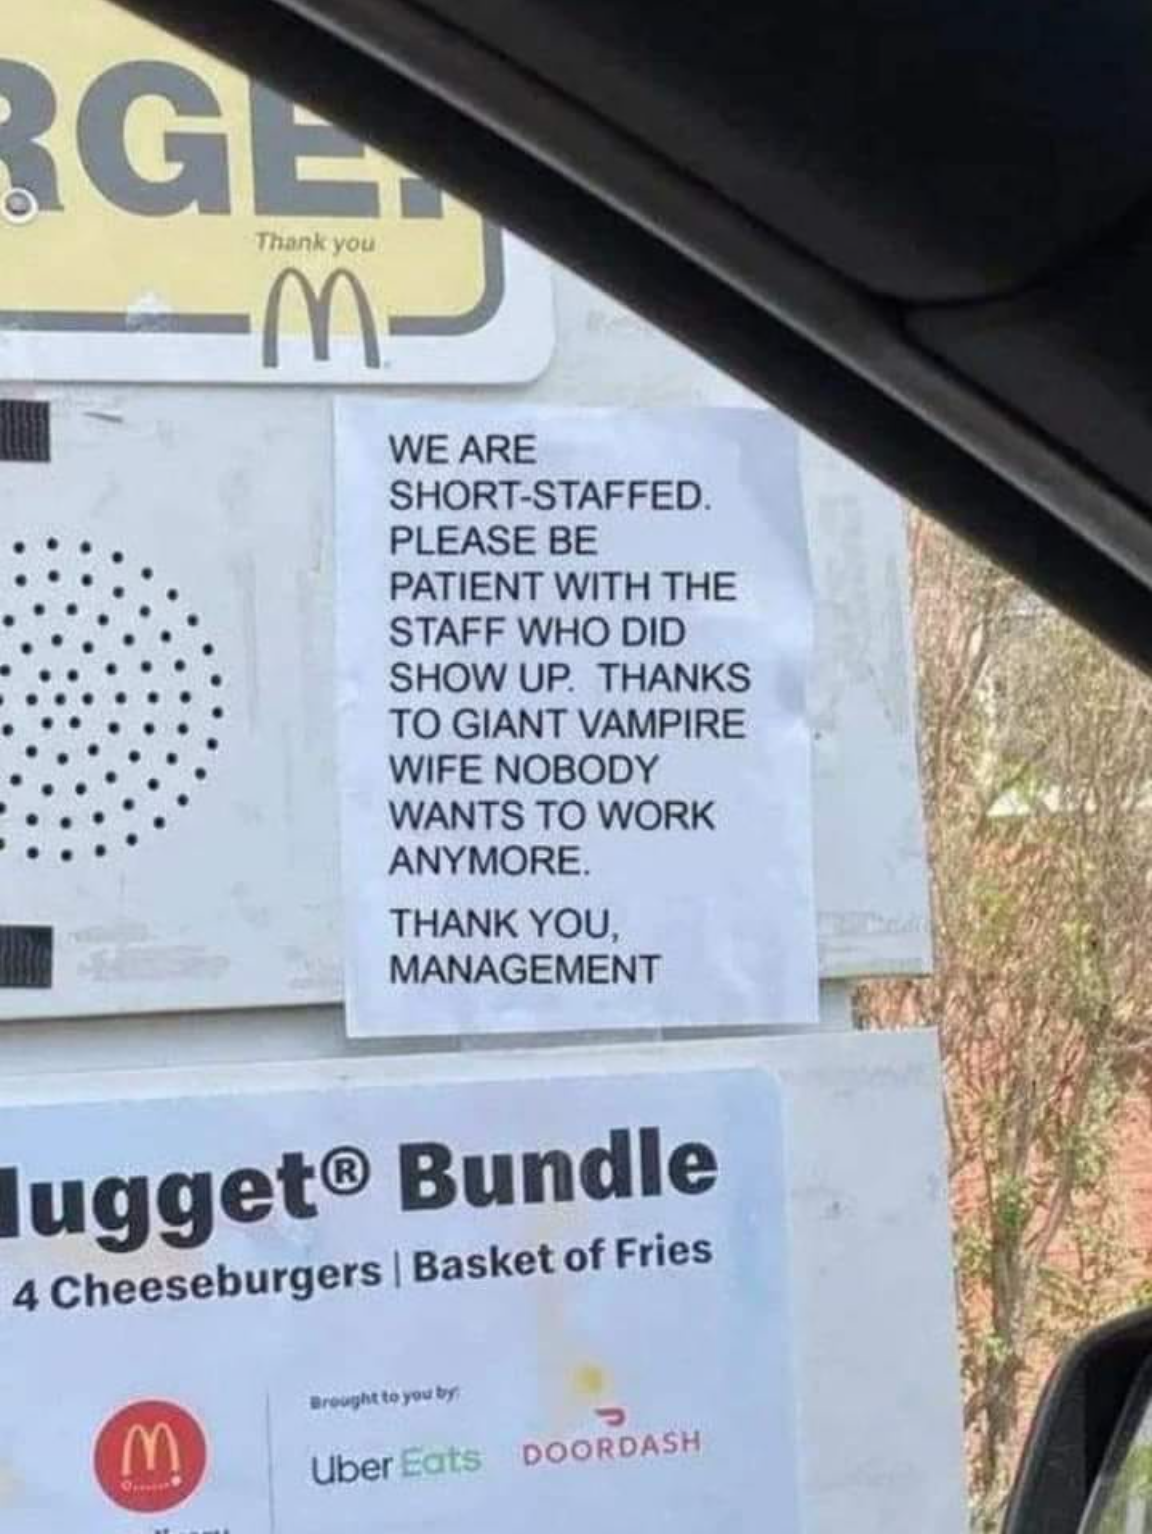 funny gaming memes - mcdonalds resident evil - Rgl m Thank you We Are ShortStaffed Please Be Patient With The Staff Who Did Show Up. Thanks To Giant Vampire Wife Nobody Wants To Work Anymore Thank You. Management lugget Bundle 4 Cheeseburgers Basket of Fr